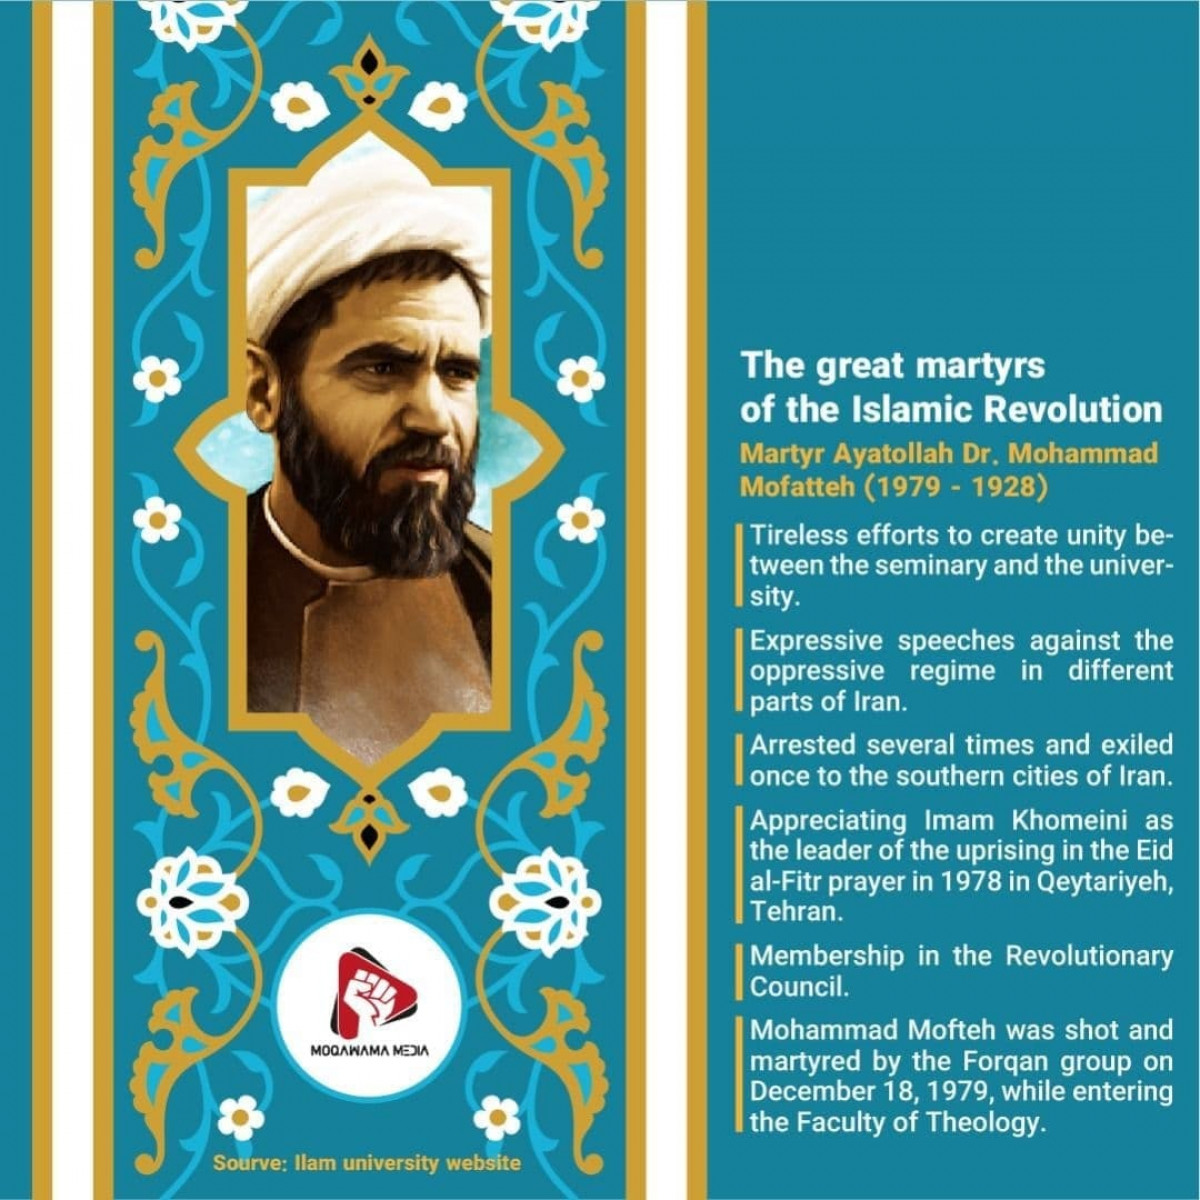 The great martyrs of the Islamic Revolution12